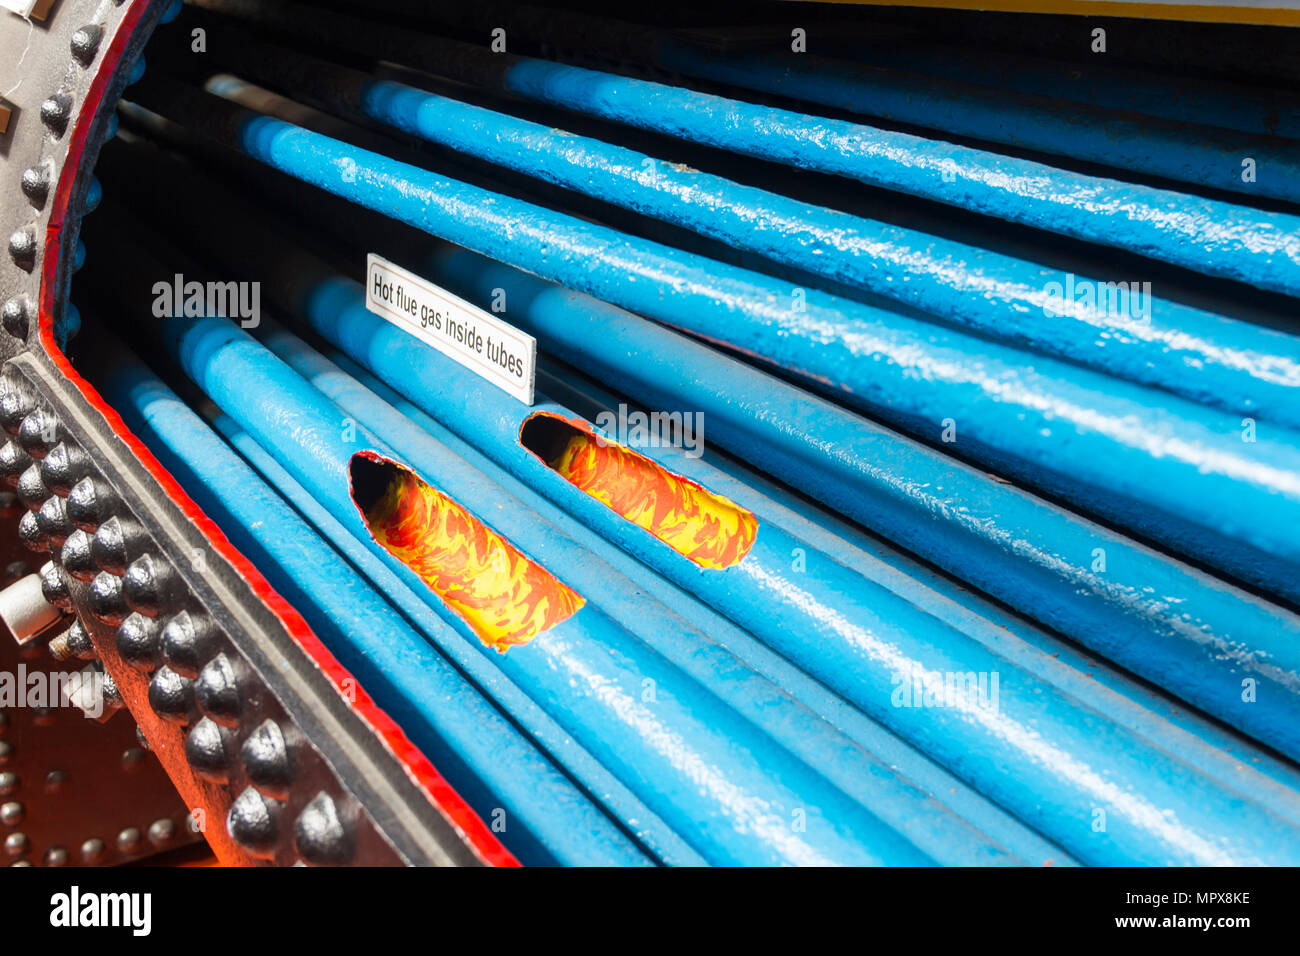 Steam engine boiler tubes displayed in a museum exhibit as a cutaway view. Stock Photo